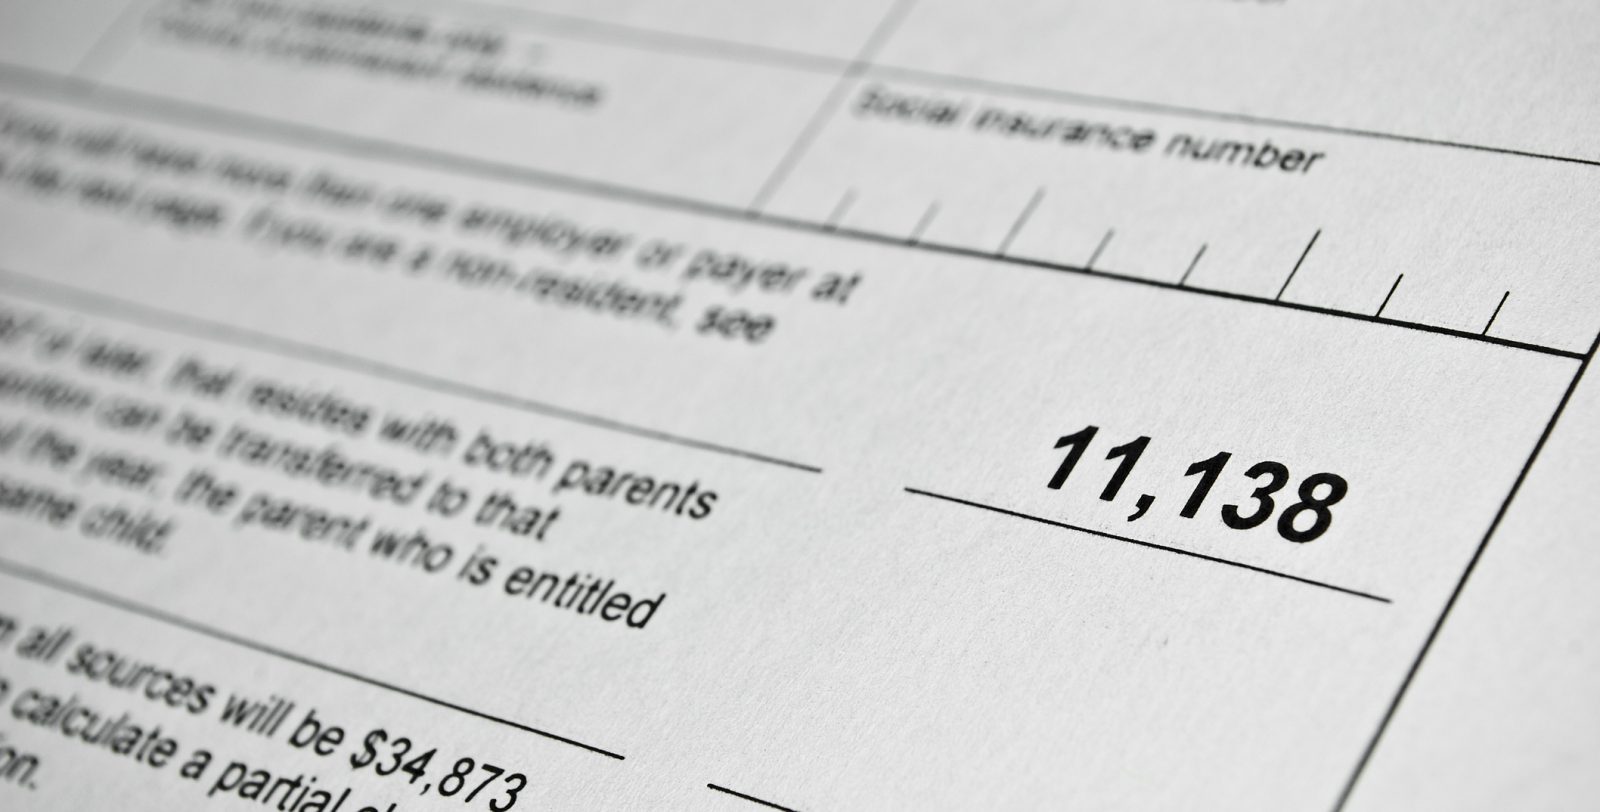 Canada Revenue Agency tax form with amount owing of more than $10,000